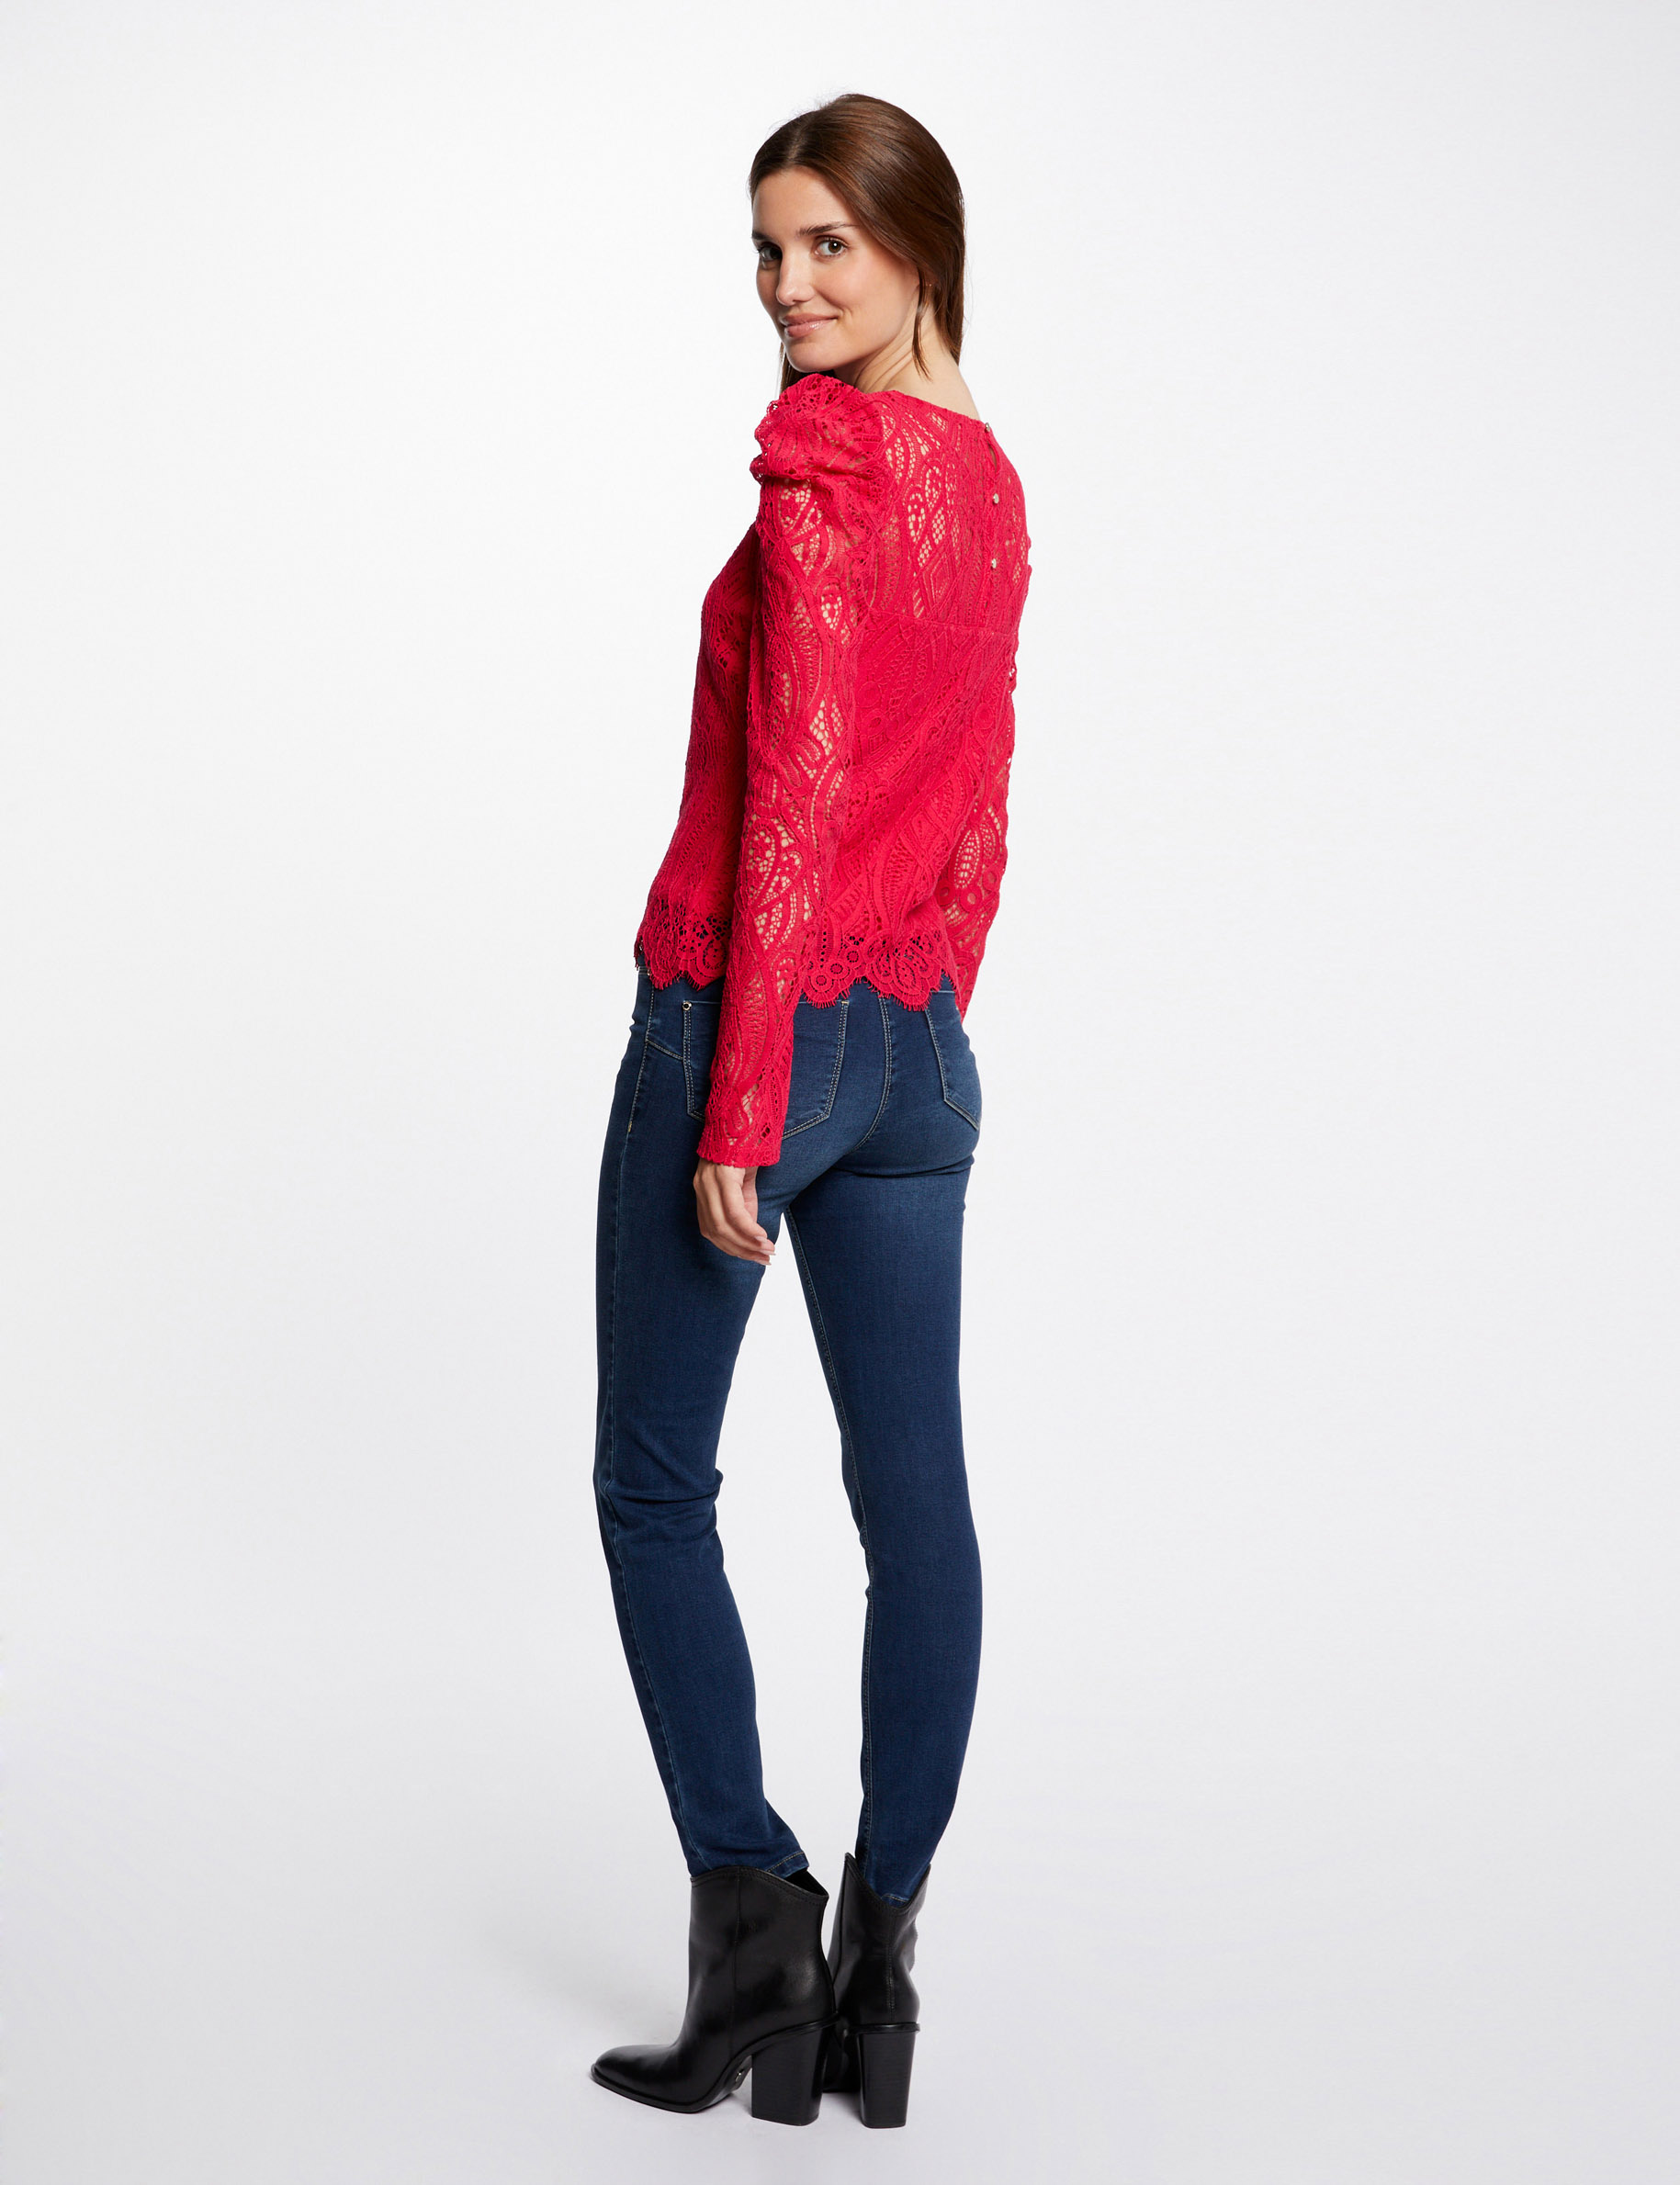 Long-sleeved t-shirt with lace fuchsia ladies'